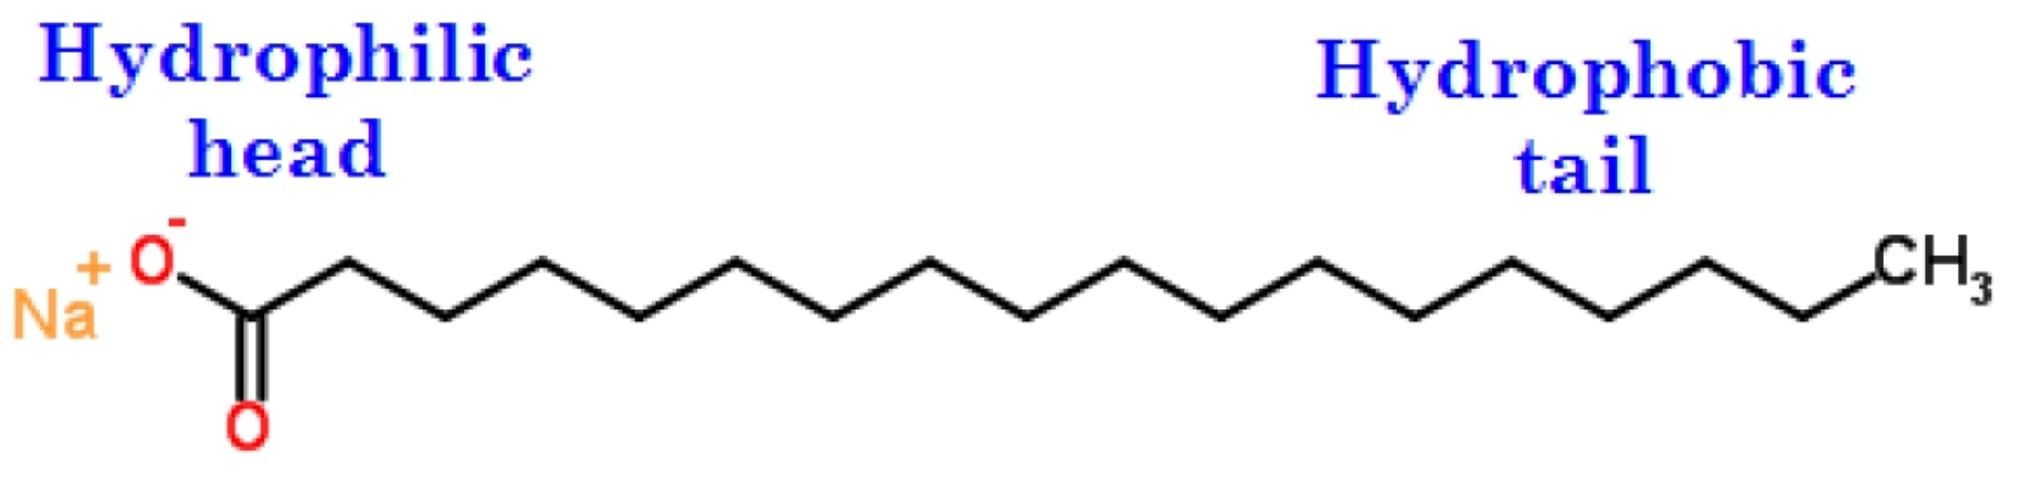 Figure 2. Chemical structure of an anionic surfactant, sodium stearate, a common component of most soaps. Its chemical formula is C18H35NaO2. This surfactant has a 17-carbon hydrophobic tail and one-dissociated carboxylate hydrophilic head.